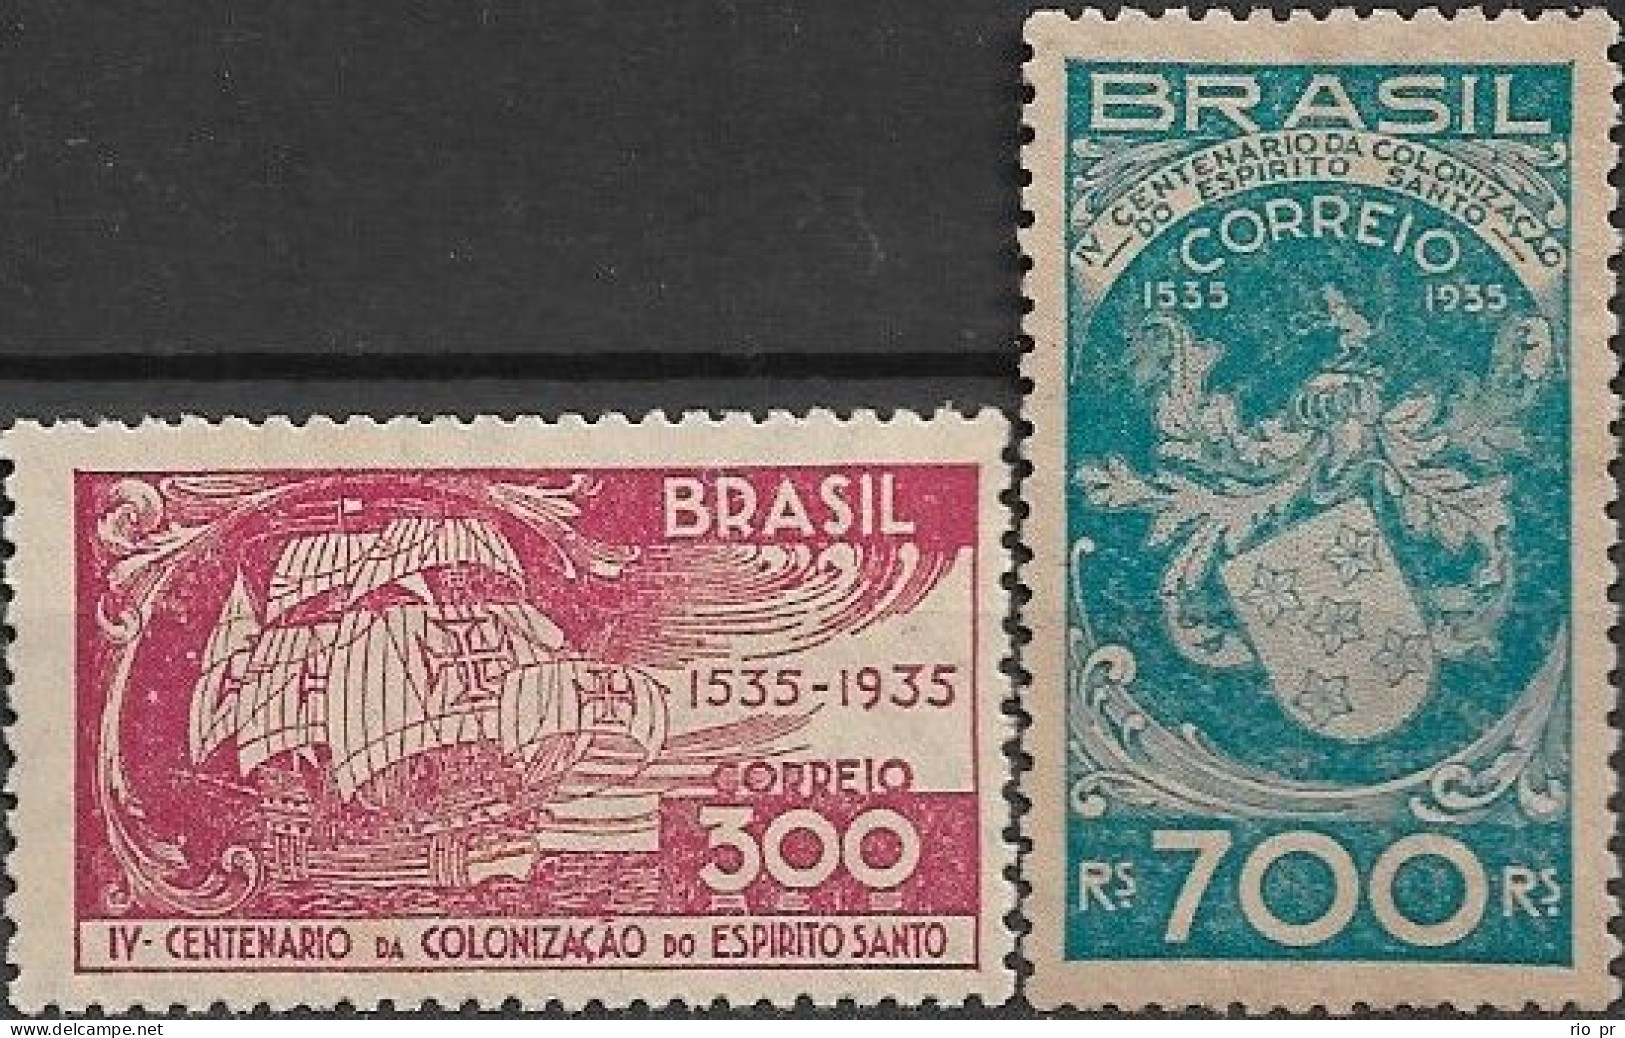 BRAZIL - COMPLETE SET 4th CENTENARY OF THE COLONIZATION OF ESPÍRITO ANTO STATE 1935 - MNH/NEW NO GUM - Ungebraucht